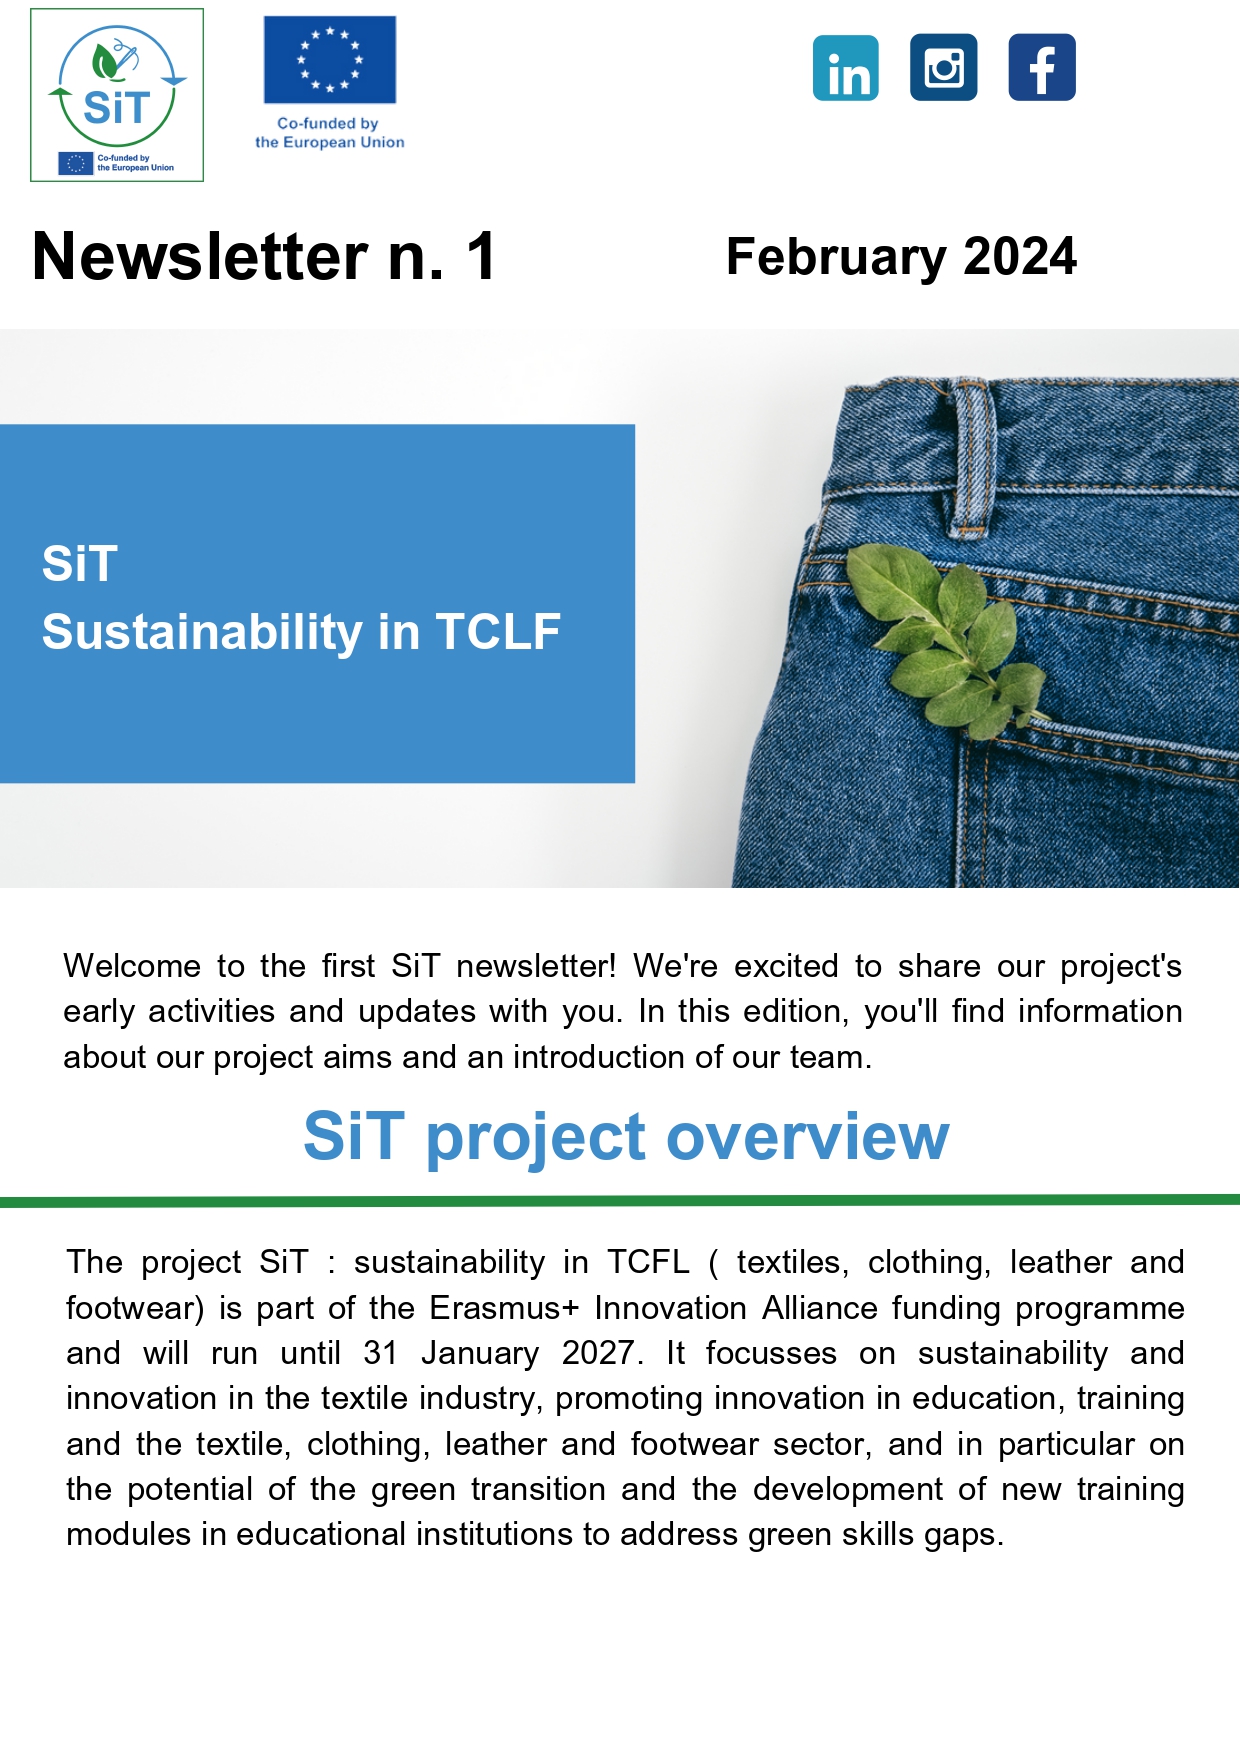 SiT project newsletter n1 - February24 (1)_page-0001